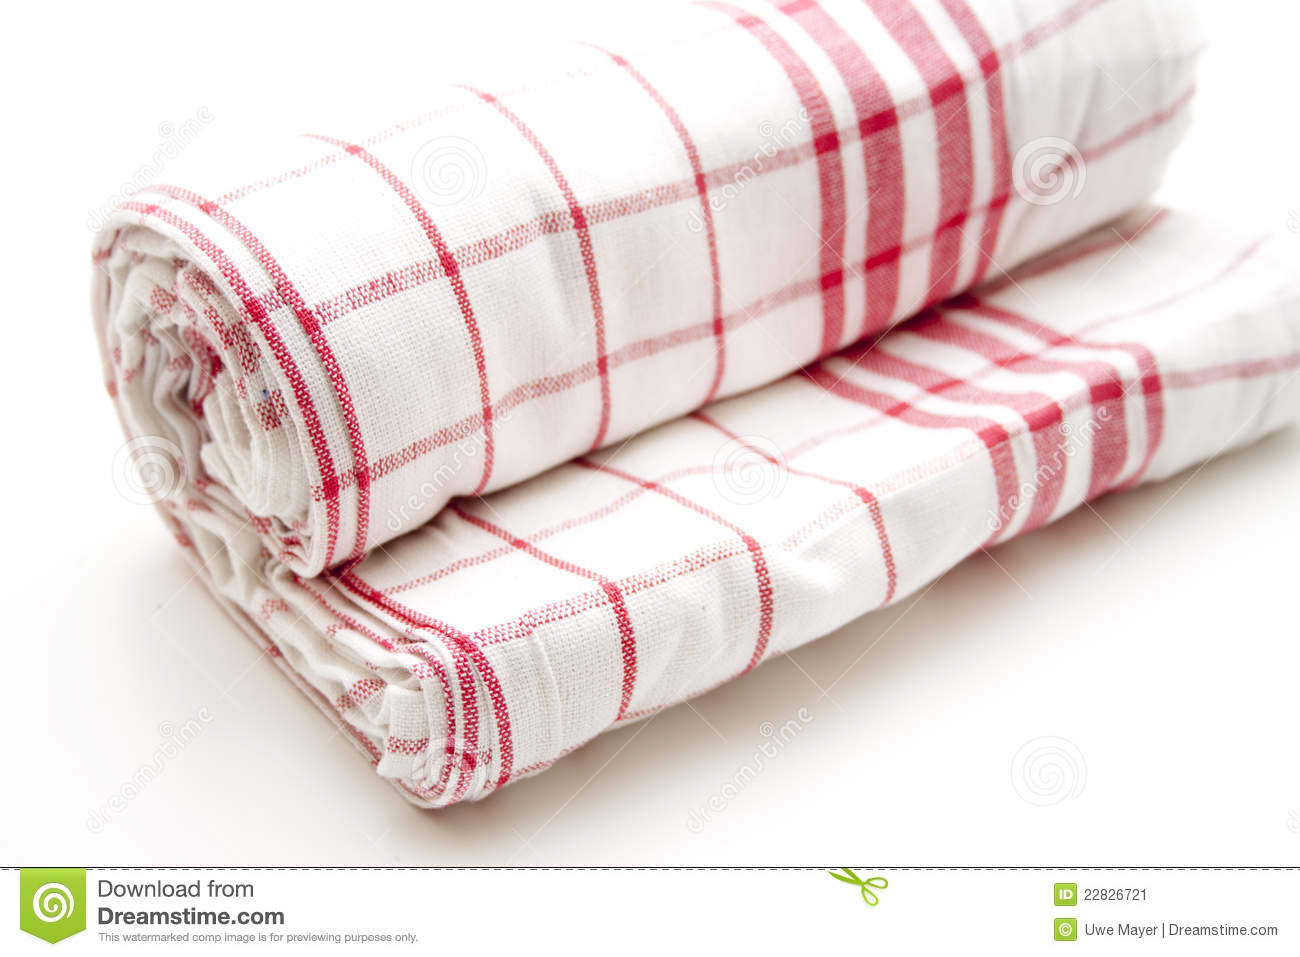 Checked Dish Towel Rolled Stock Image   Image  22826721